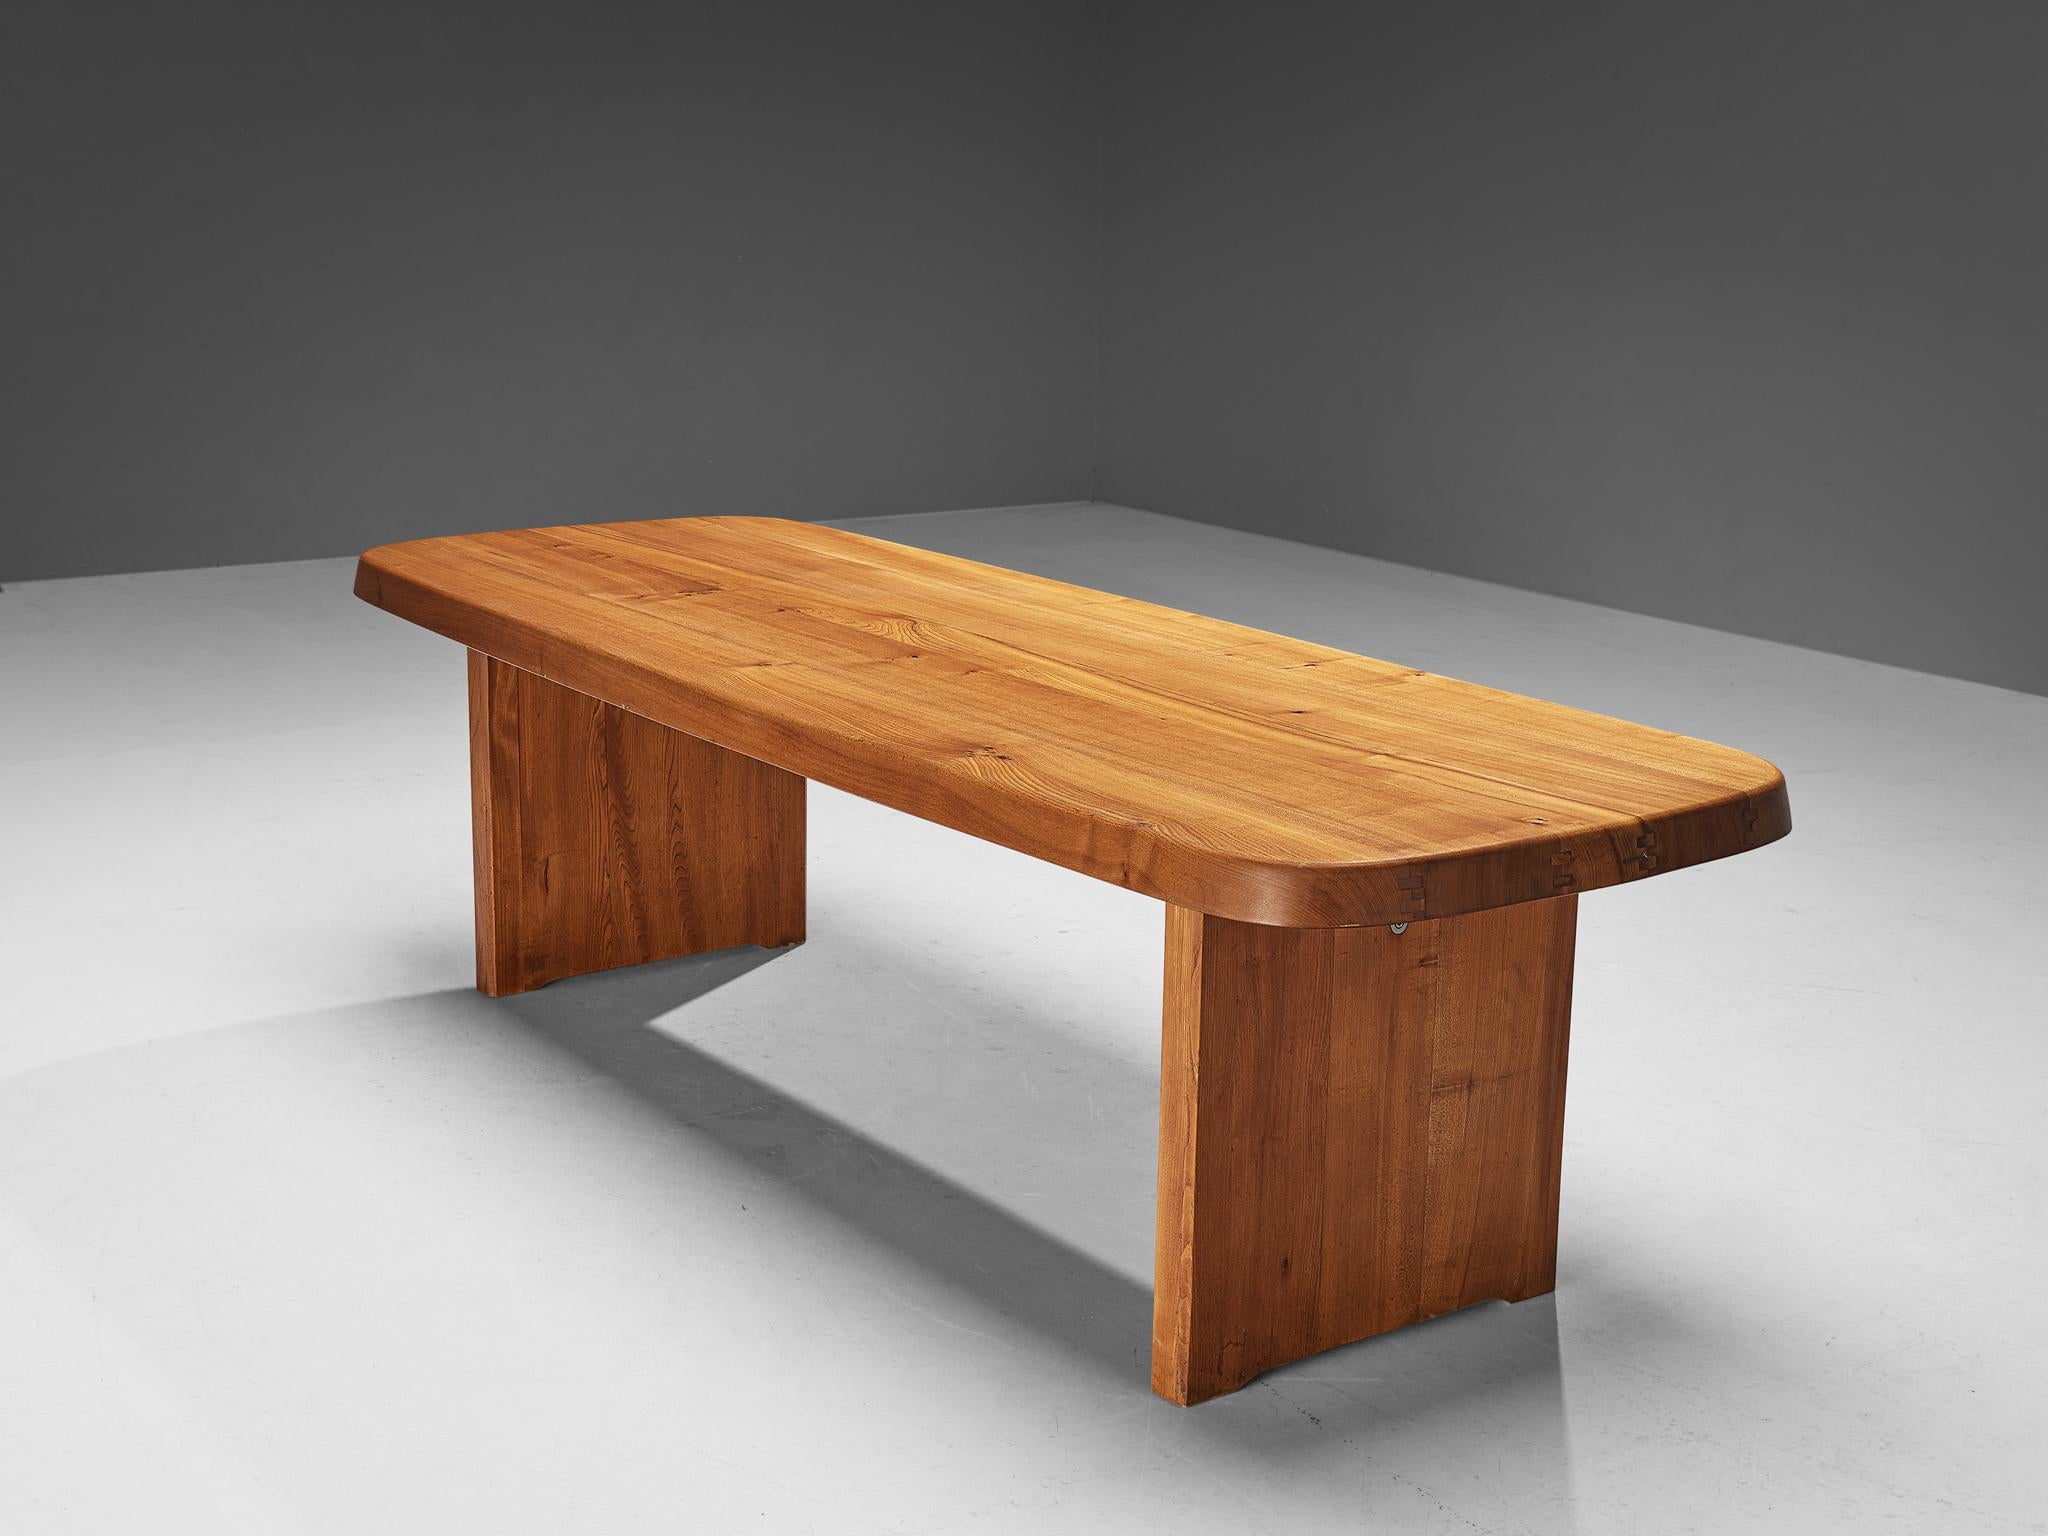 Pierre Chapo, dining table, model T20A, elmwood, France, 1972

This T20A table is one of the early editions designed by Pierre Chapo, known for his hallmark use of solid elmwood and a commitment to pure and clean design and construction principles